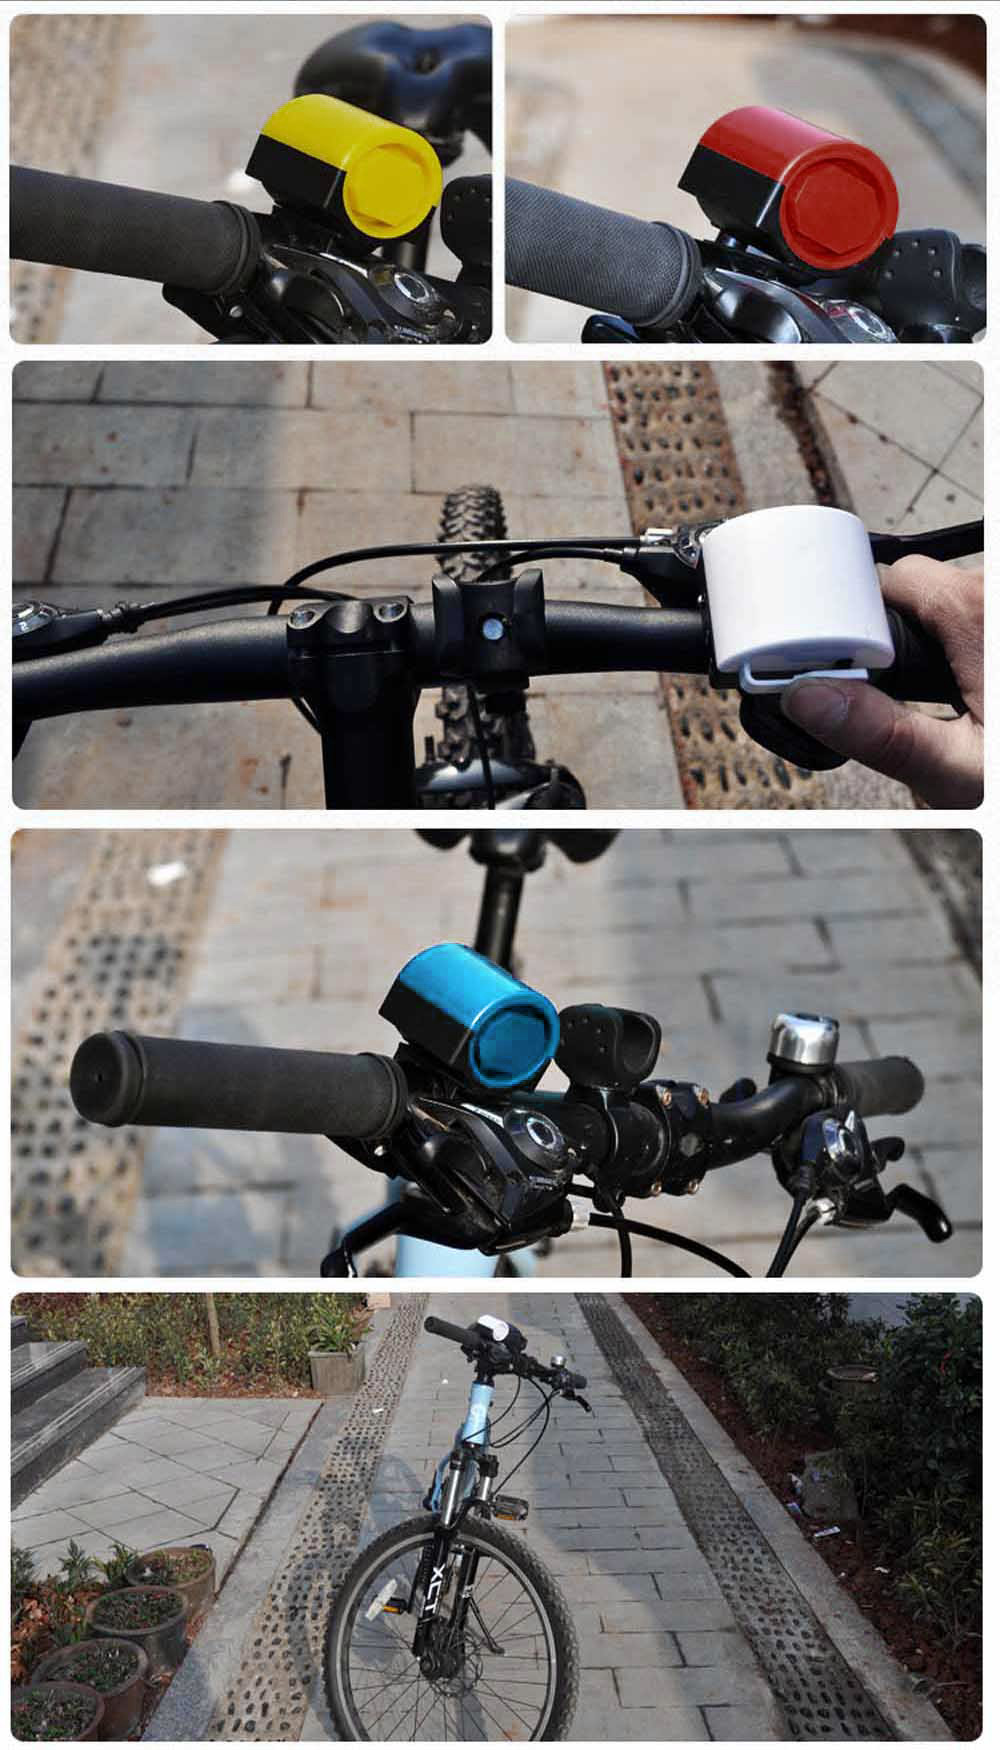 360 Degree Rotation Ultra-loud MTB Road Bicycle Bike Electronic Bell Horn Cycling Hooter Siren Accessory